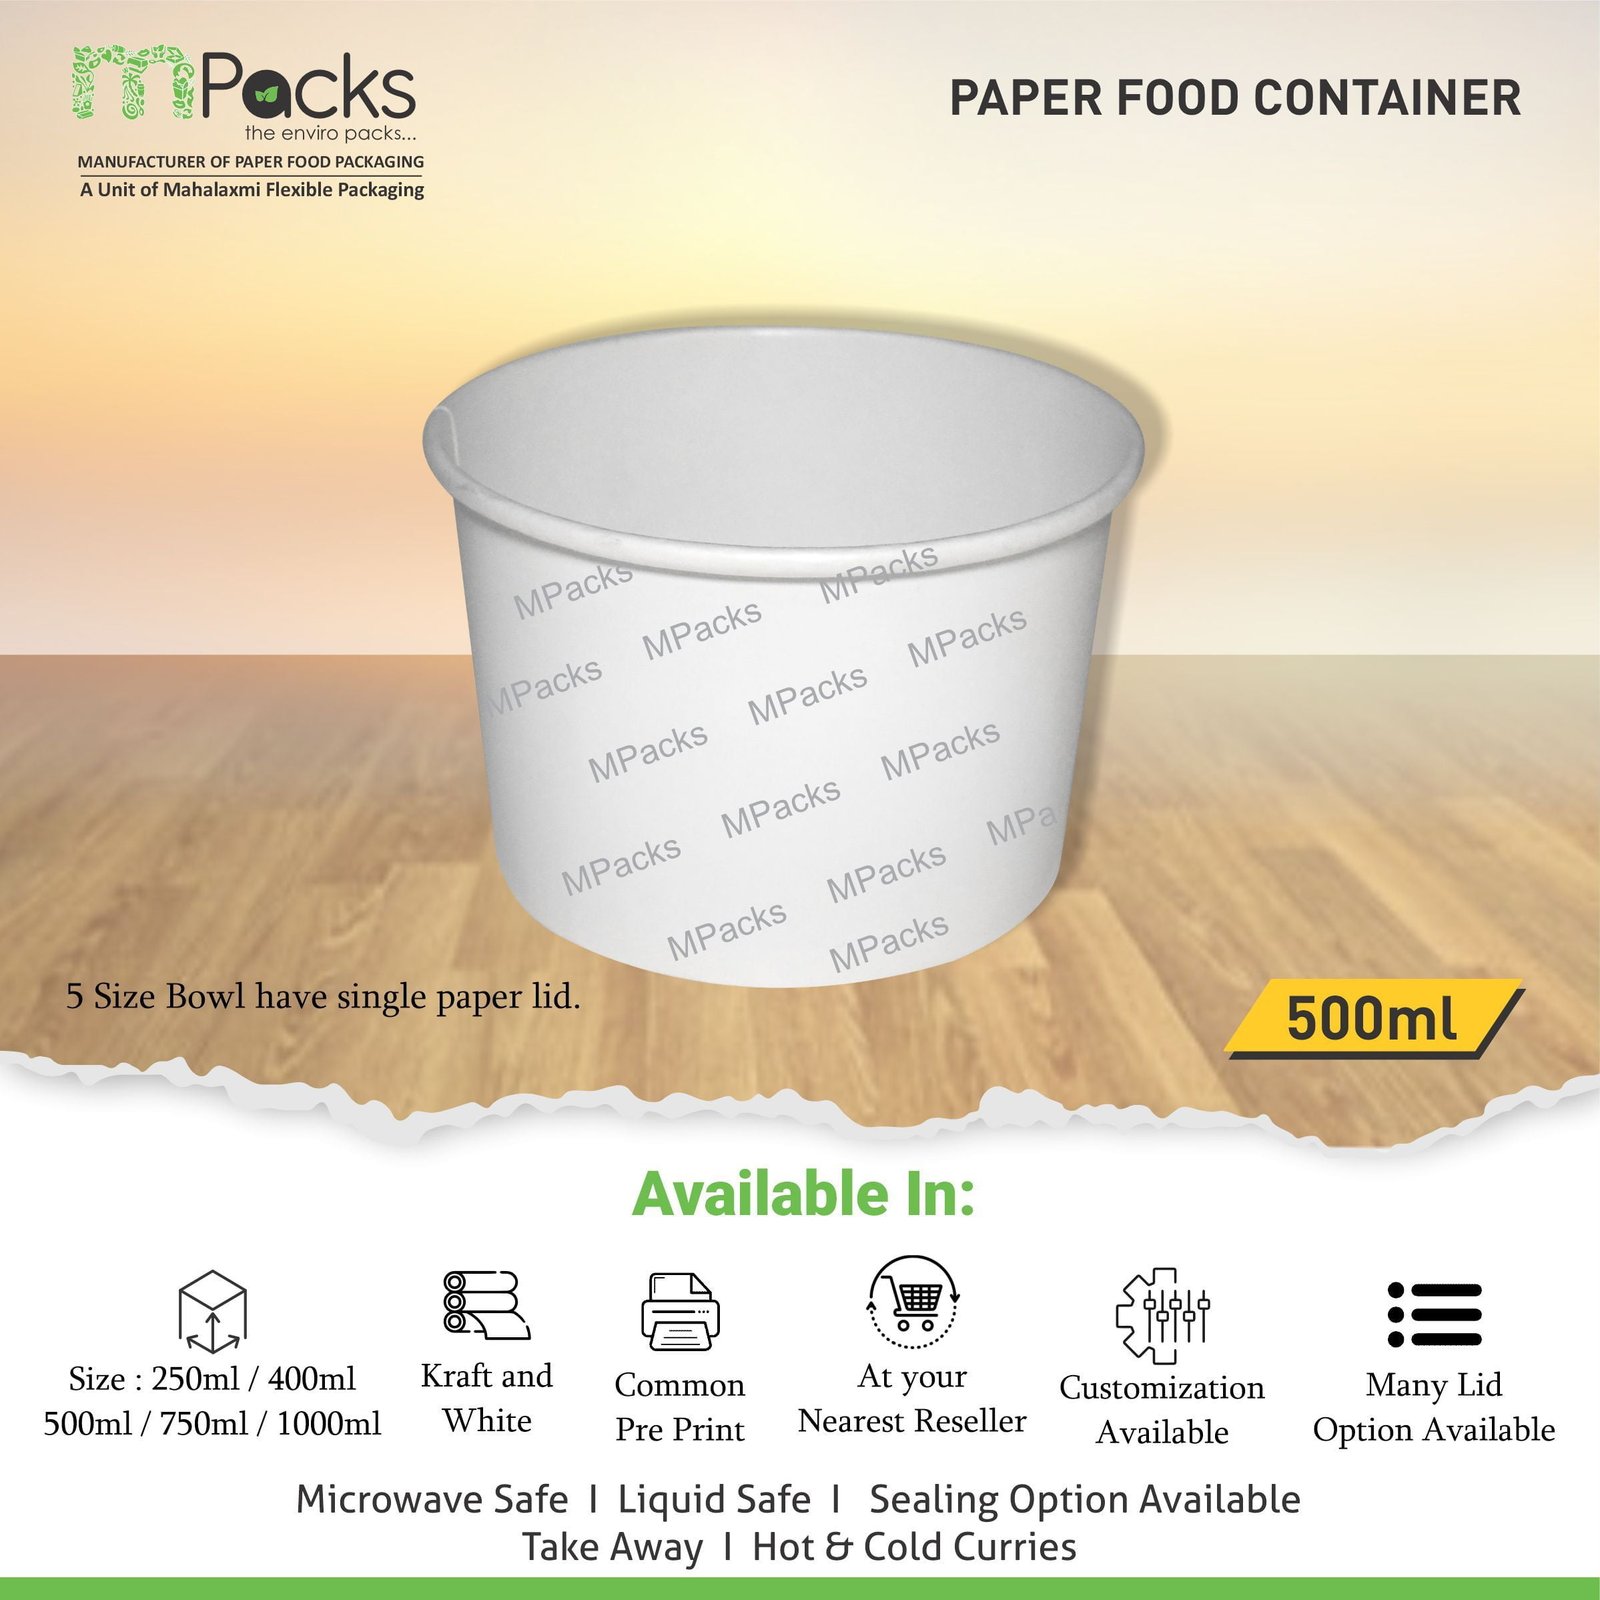 Paper Food Container, Soup Bowl - White Paper with Lid -500ml, 16oz Size